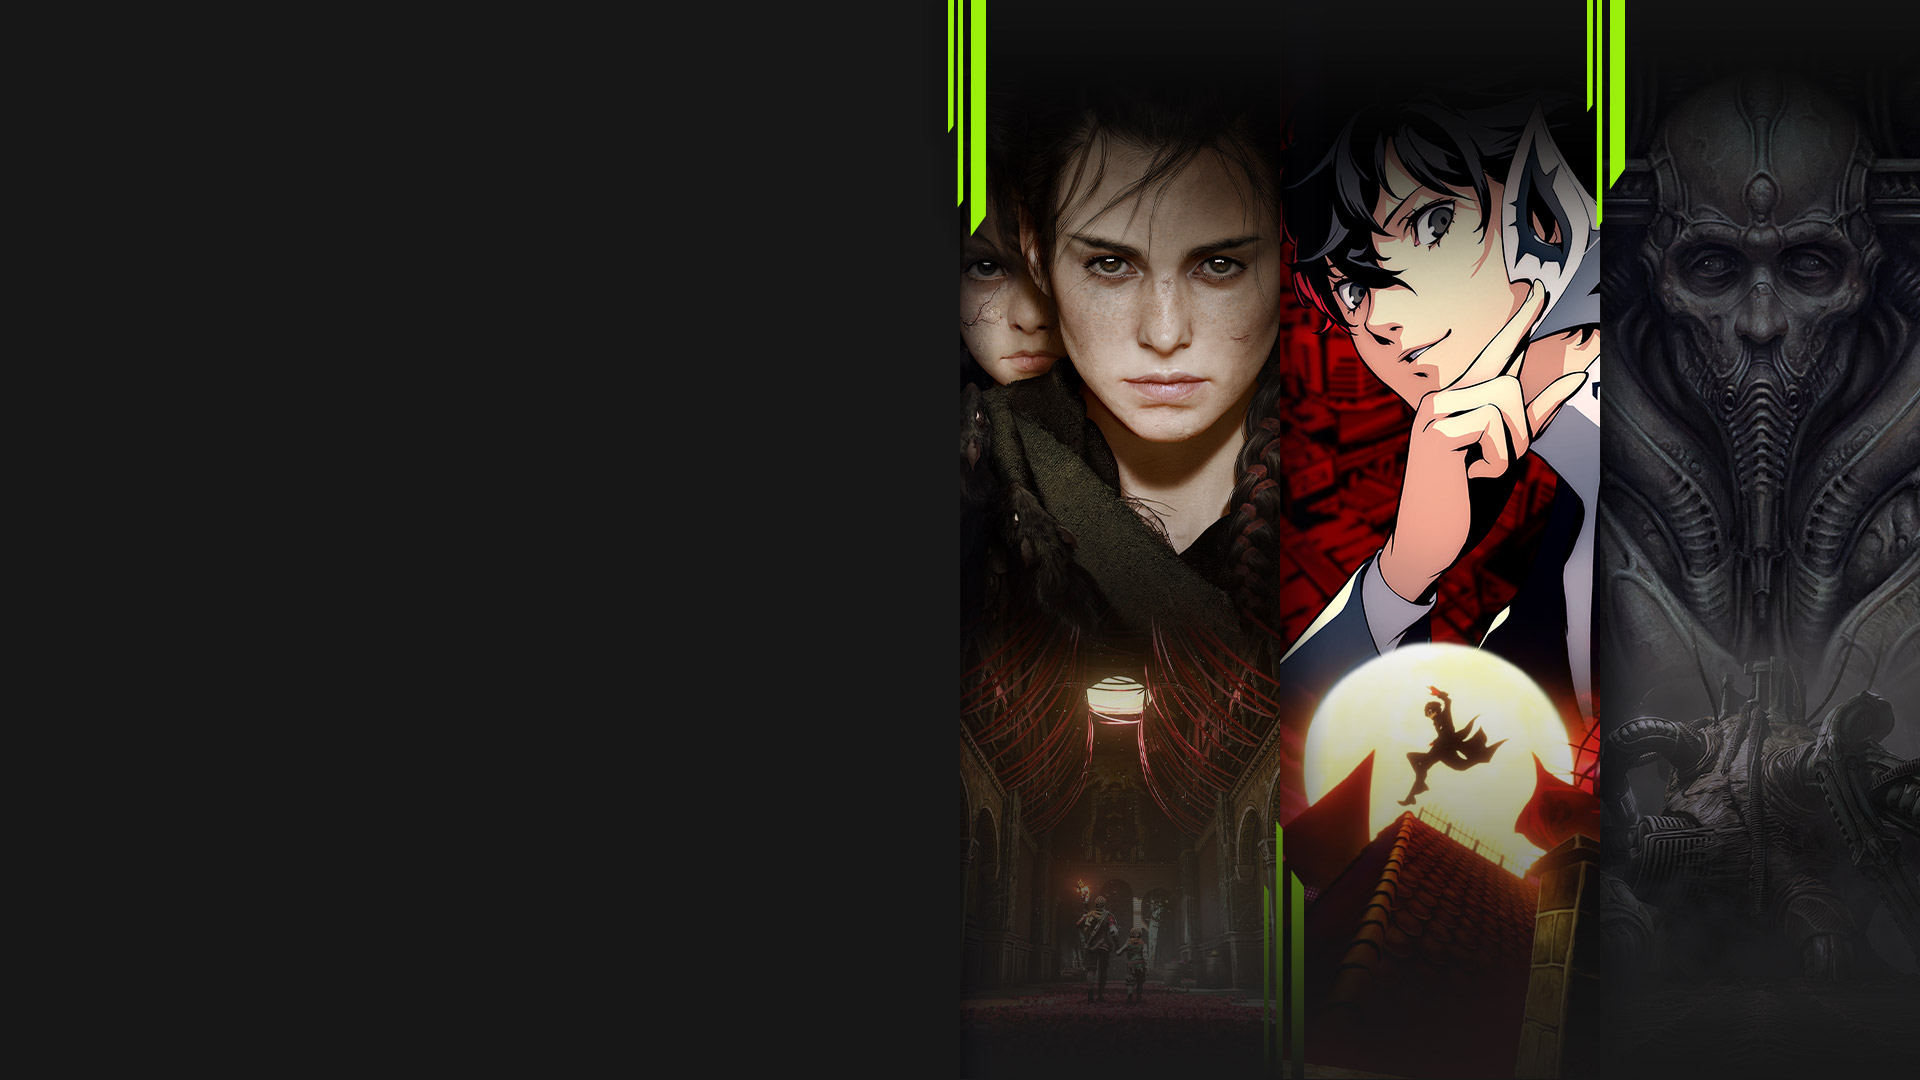 Game art from multiple games available now with Xbox Game Pass including A Plague Tale: Requiem, Persona 5 Royal, Scorn and Chivalry 2